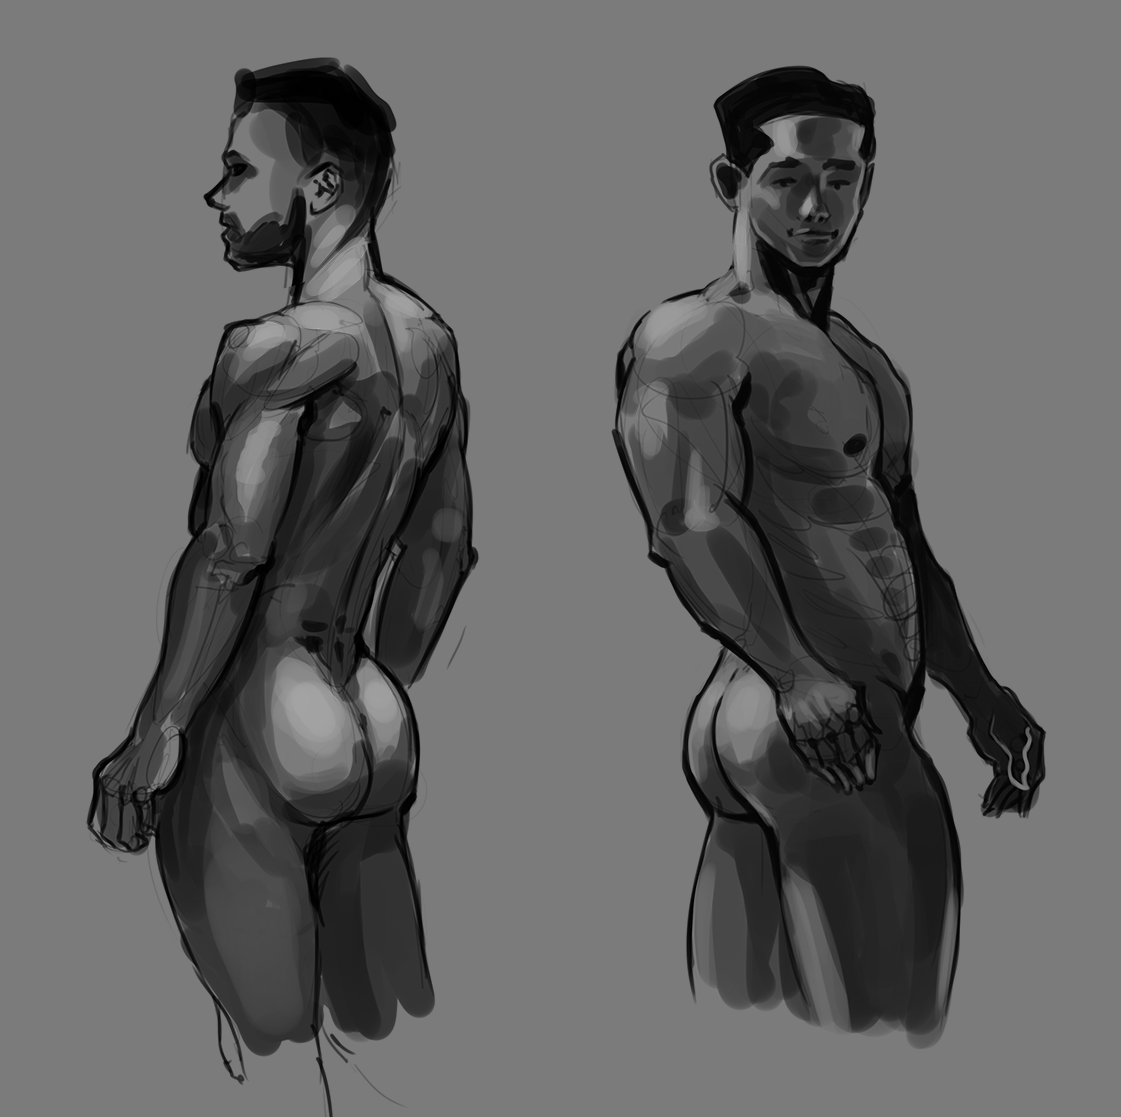 XaB au travail ! [nudity inside] - Page 11 SpeedStudies_2016-09-06-torse%252Bhanches_homme